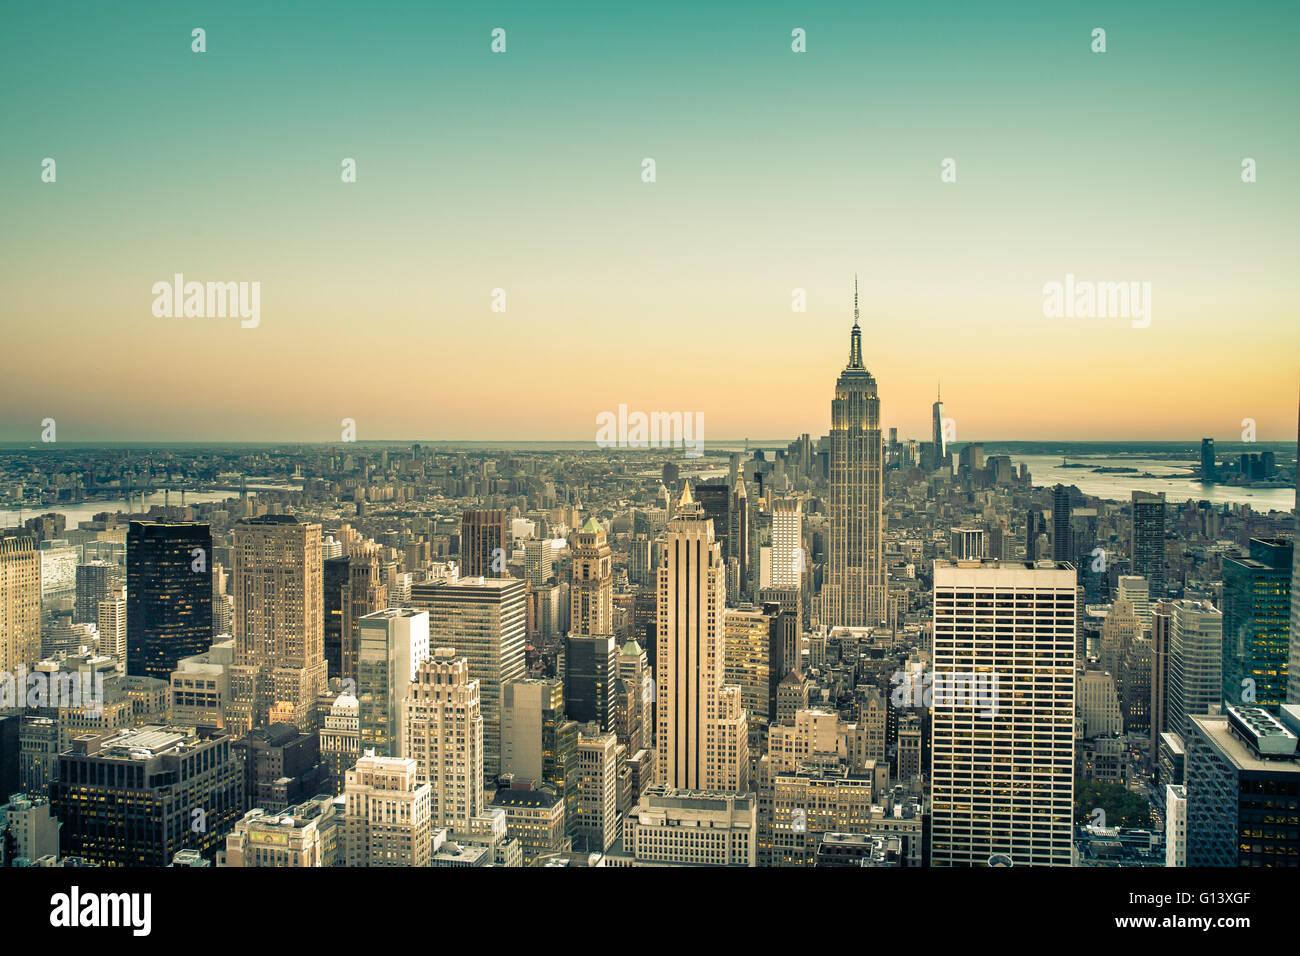 View of New York City across Manhattan with buildings and vintage tone Stock Photo